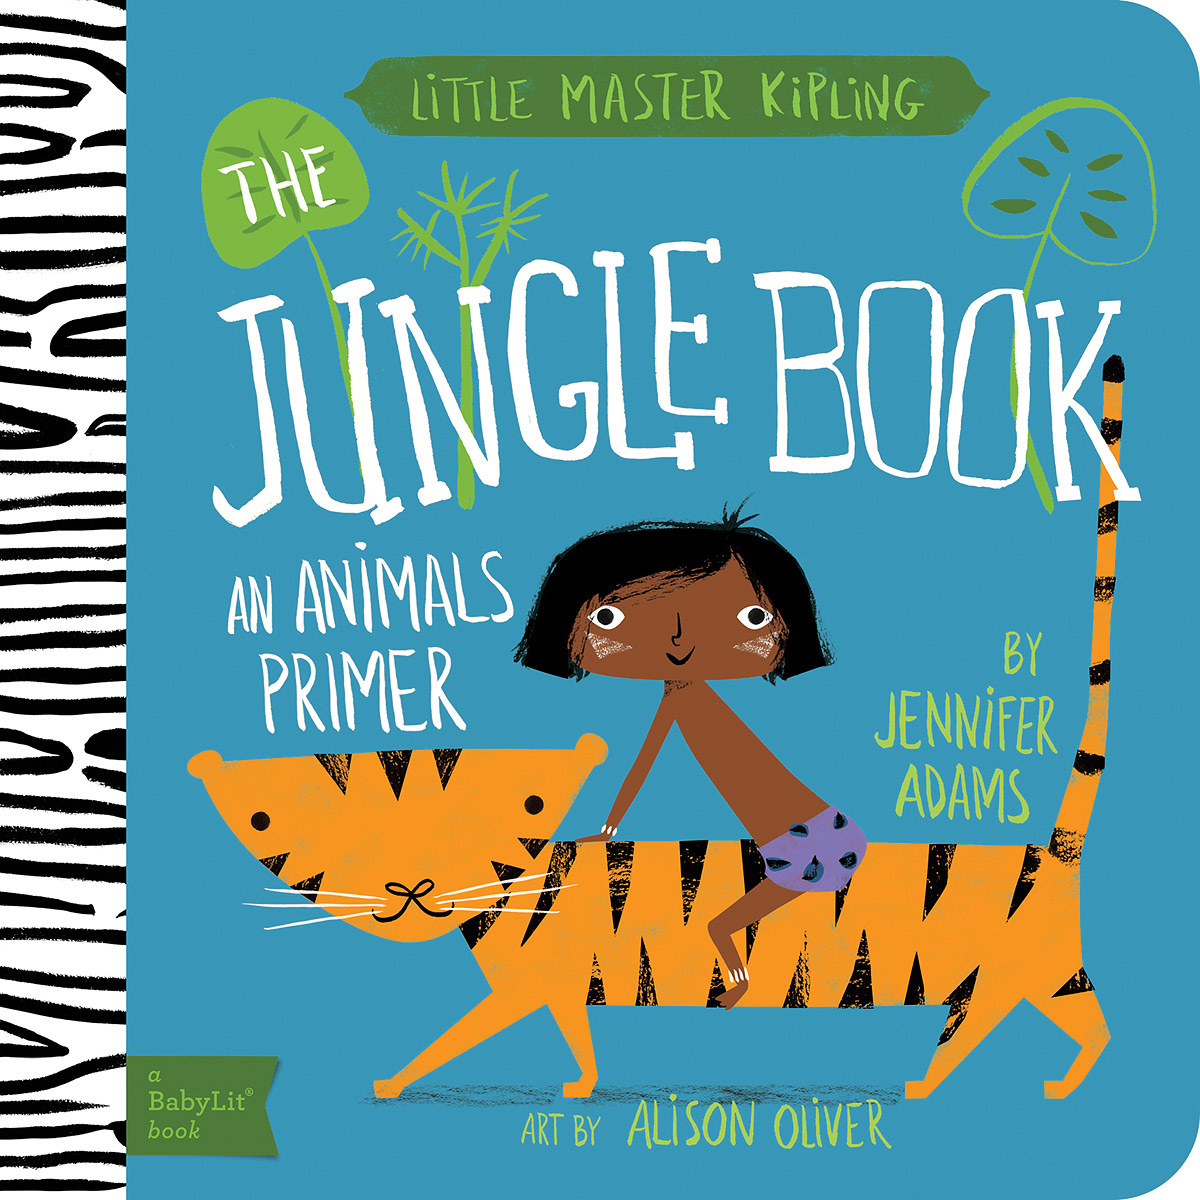 Little Master Kipling: Jungle Book - Jennifer Adams12296407The Jungle Book: A BabyLitR Animals Primer Venture deep into the jungle on an animal-naming safari hunt in Jungle Book: A BabyLit Animal Primer. Spy a sneaky snake, a lazy bear, and a proud panther before roaring like a tiger into the night. Jennifer Adam